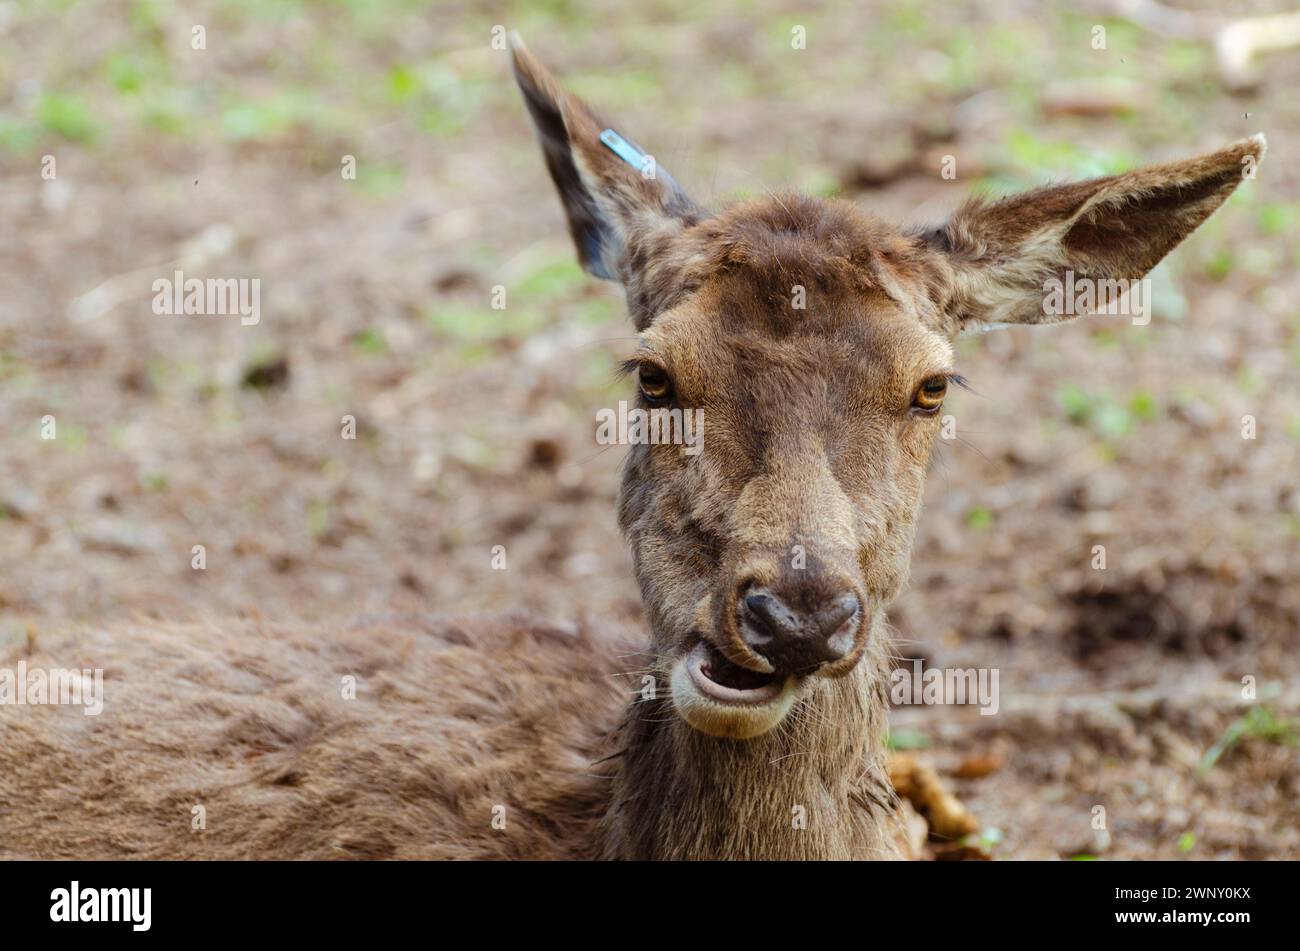 close up deer portrait with funny face Stock Photo